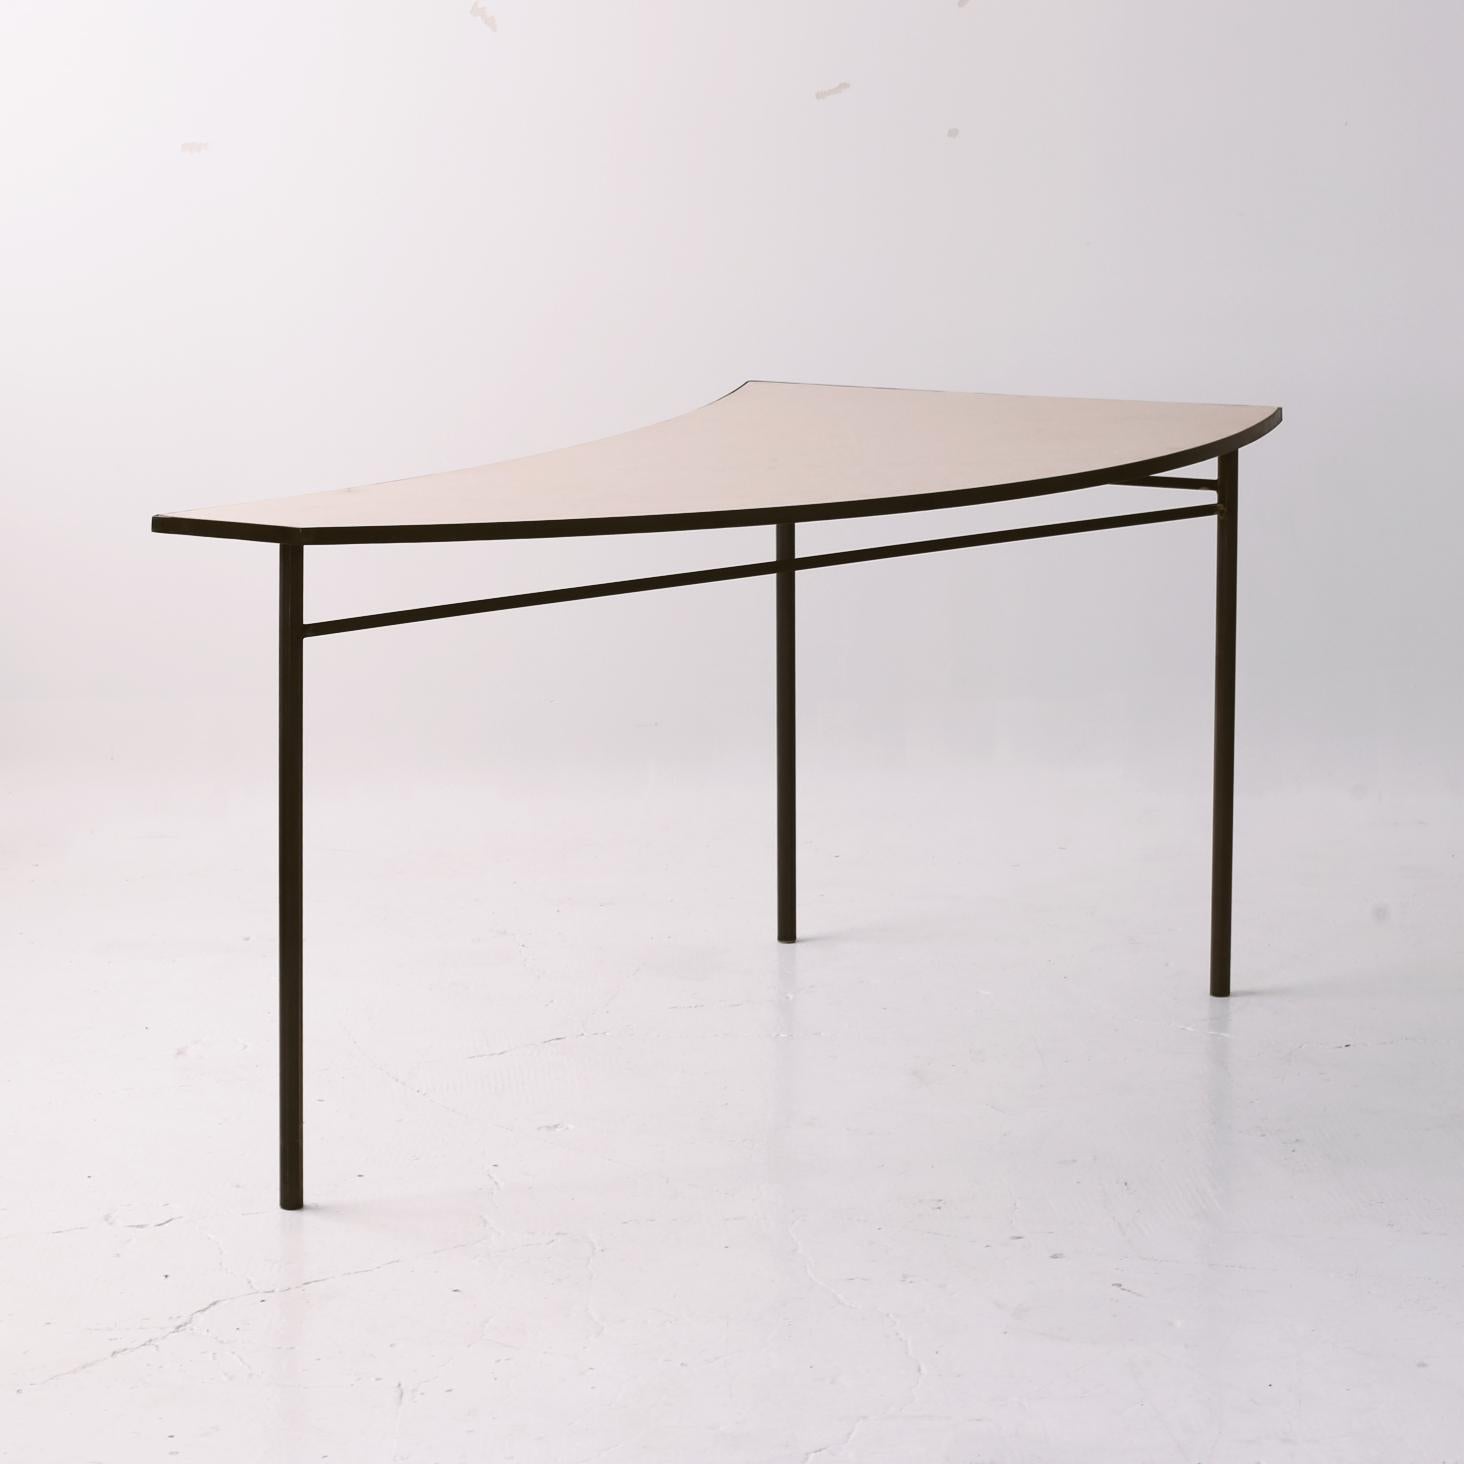 Piece B Tabula [non] Rasa table by Studio Traccia.
Dimensions: W 140 x D 104 x H 74 cm.
Materials: Steel.
Different combinations are available.

The table was designed for our installation called tabula[non]rasa developed for Milan Design Week